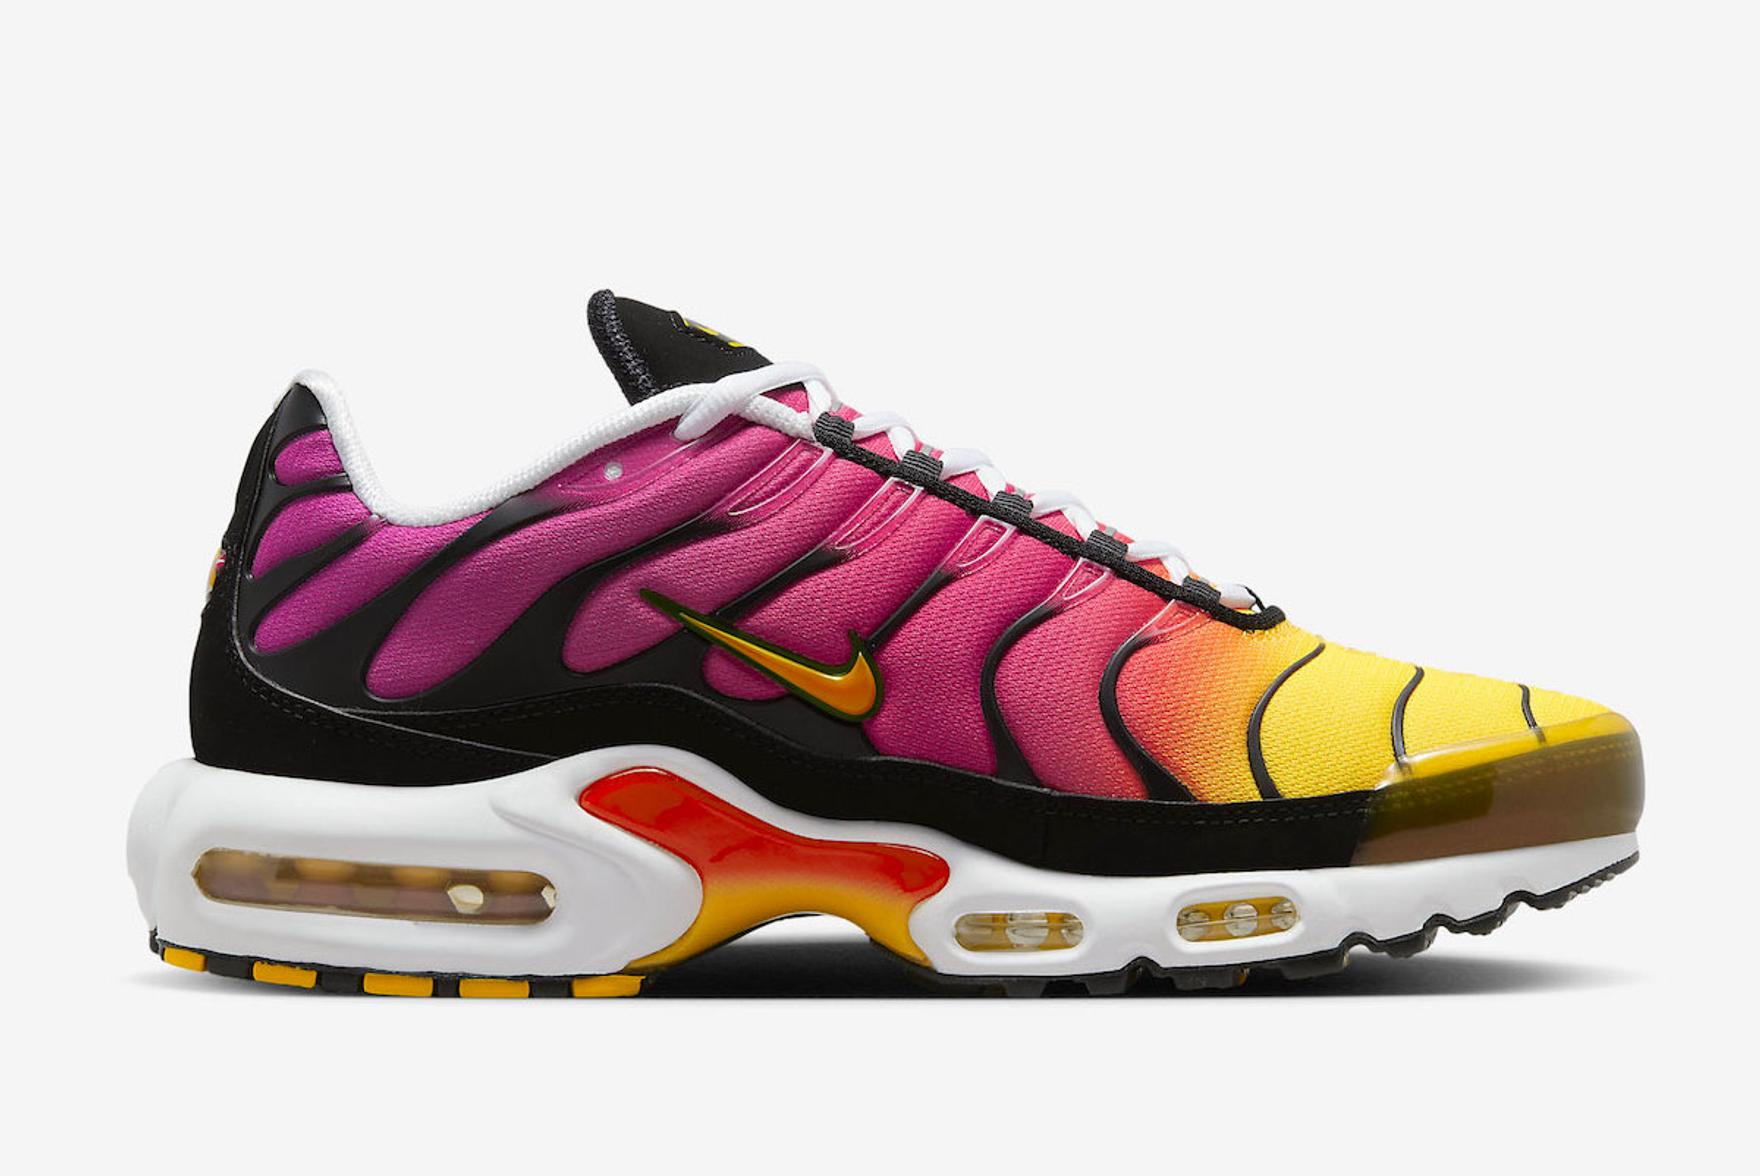 Nike Restore the ‘Rainbow’ Air Max Plus From 1999